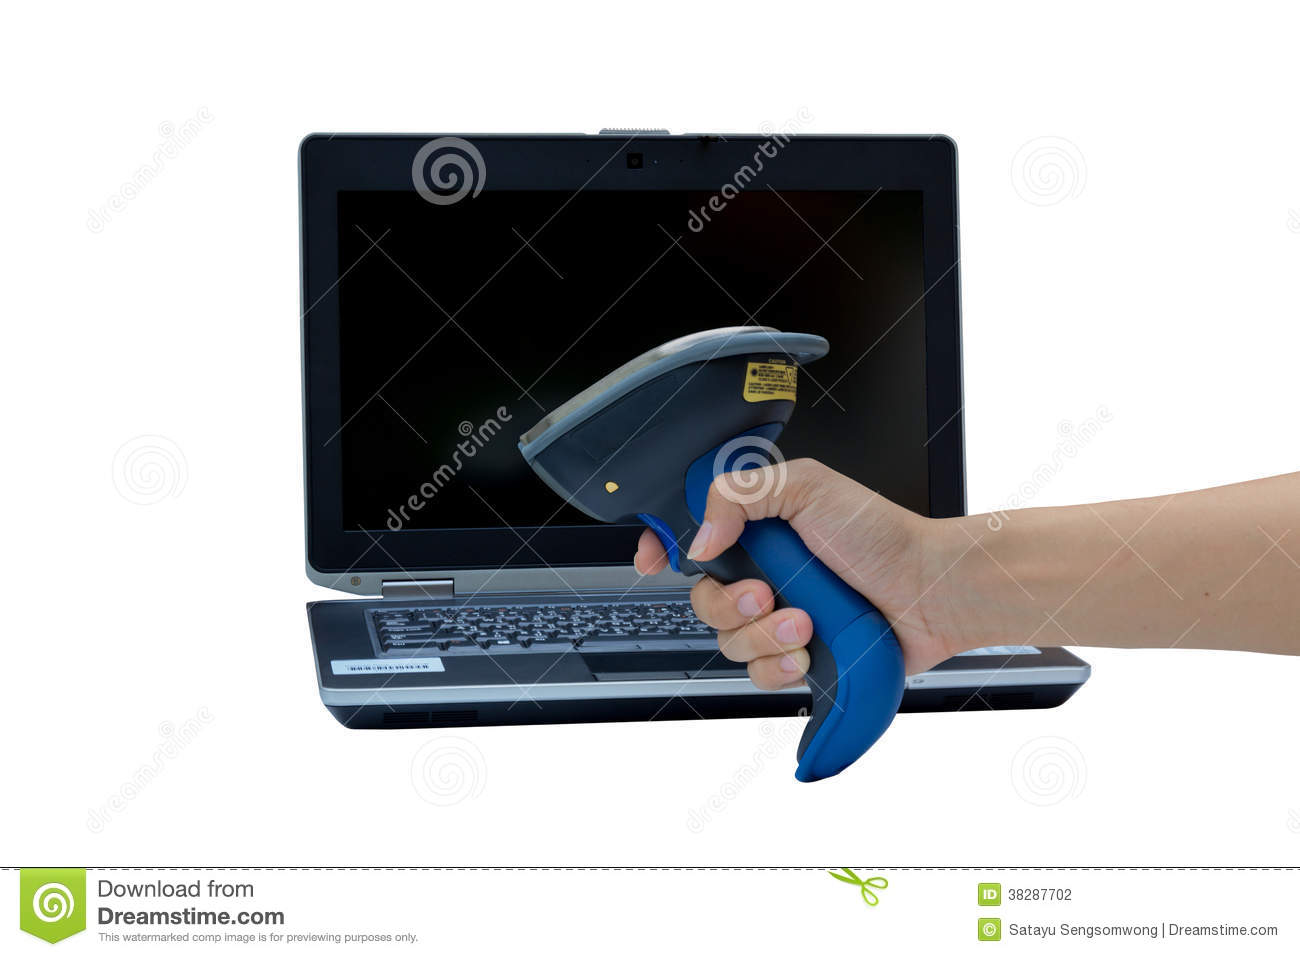 Scanning Label On Notebook Or Laptop With Wireless Barcode Scanner